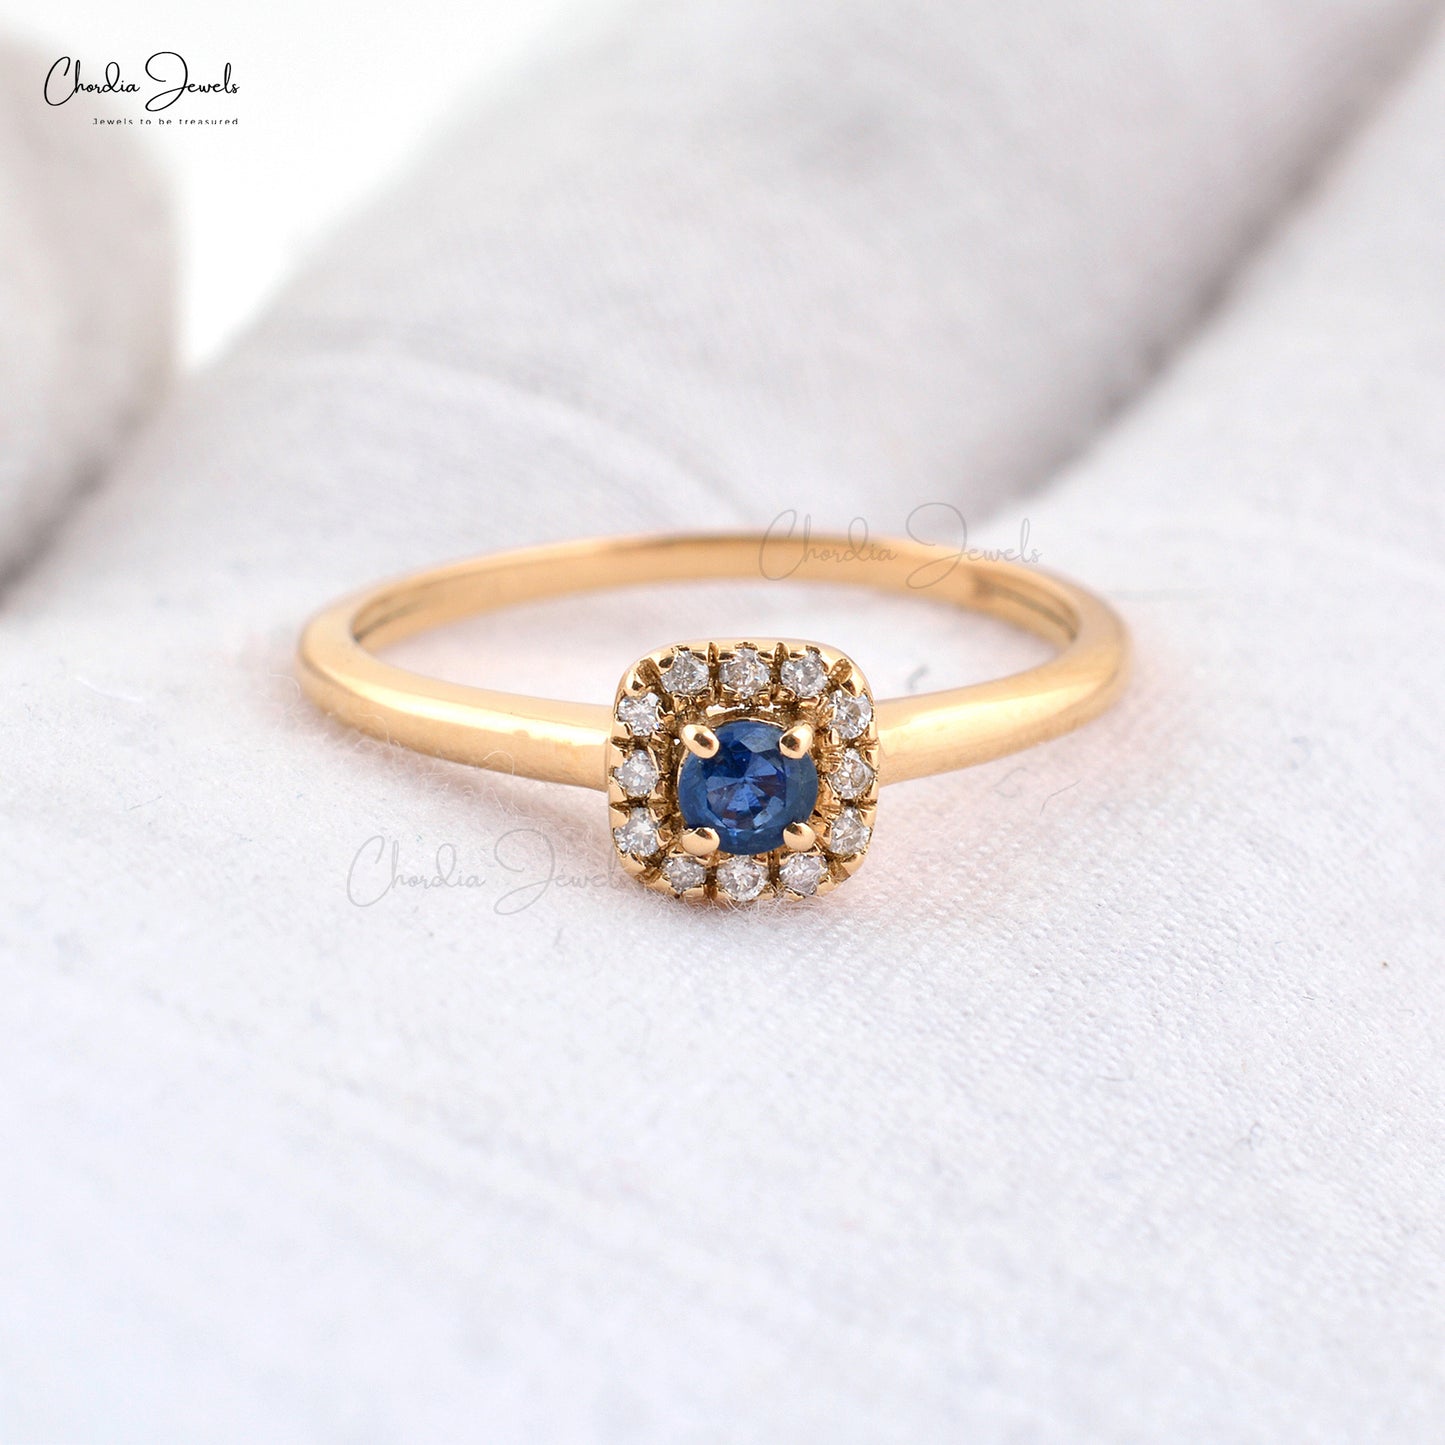 Vintage 14K Yellow Gold Oval Cut Blue Sapphire Ring - Timekeepersclayton